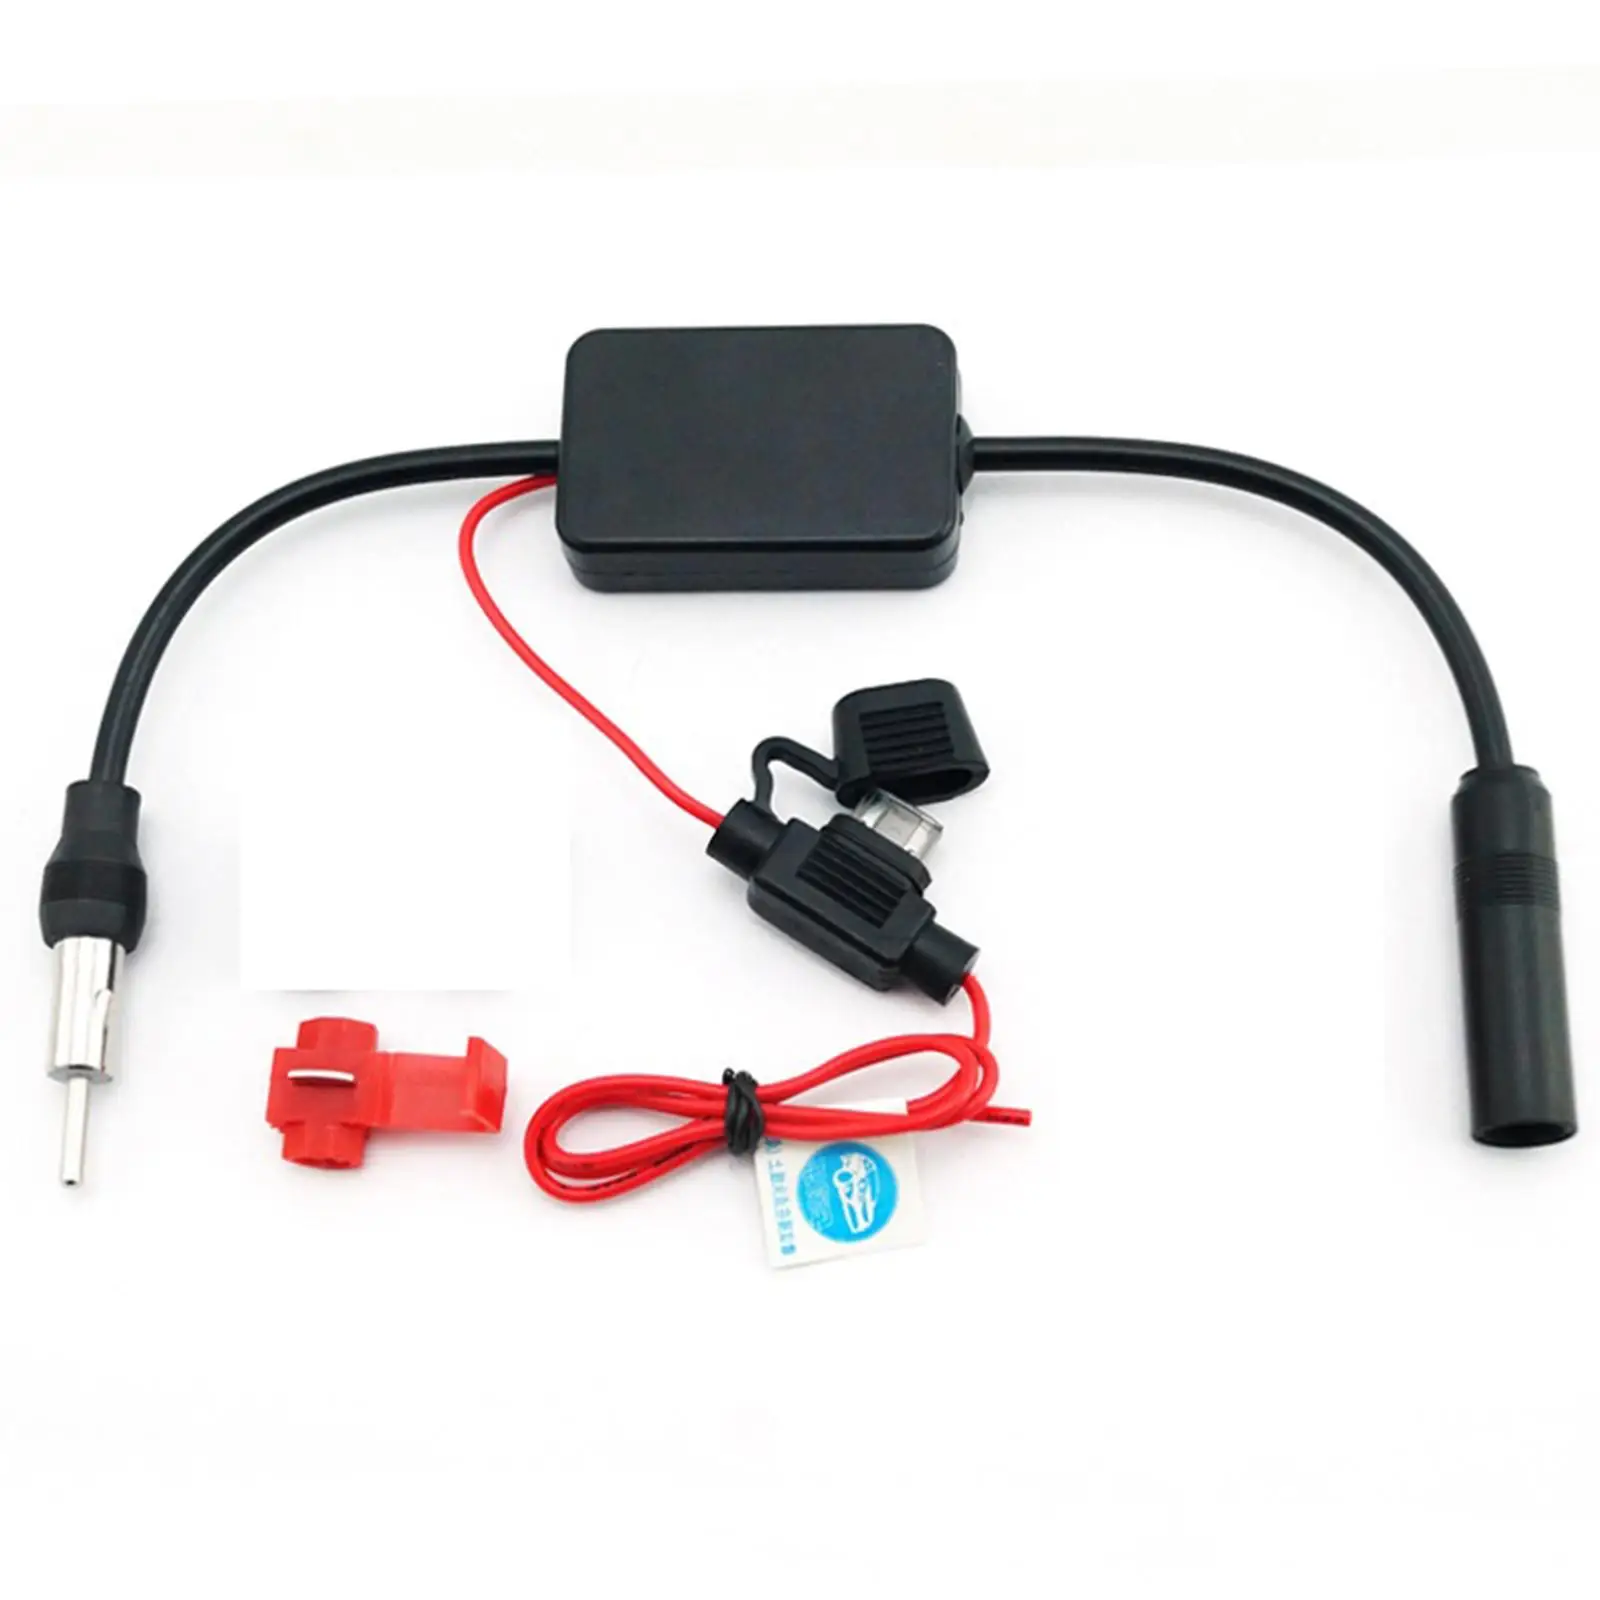 ANT-208 Car Radio Antenna Amplifier Universal for Automobile Fittings